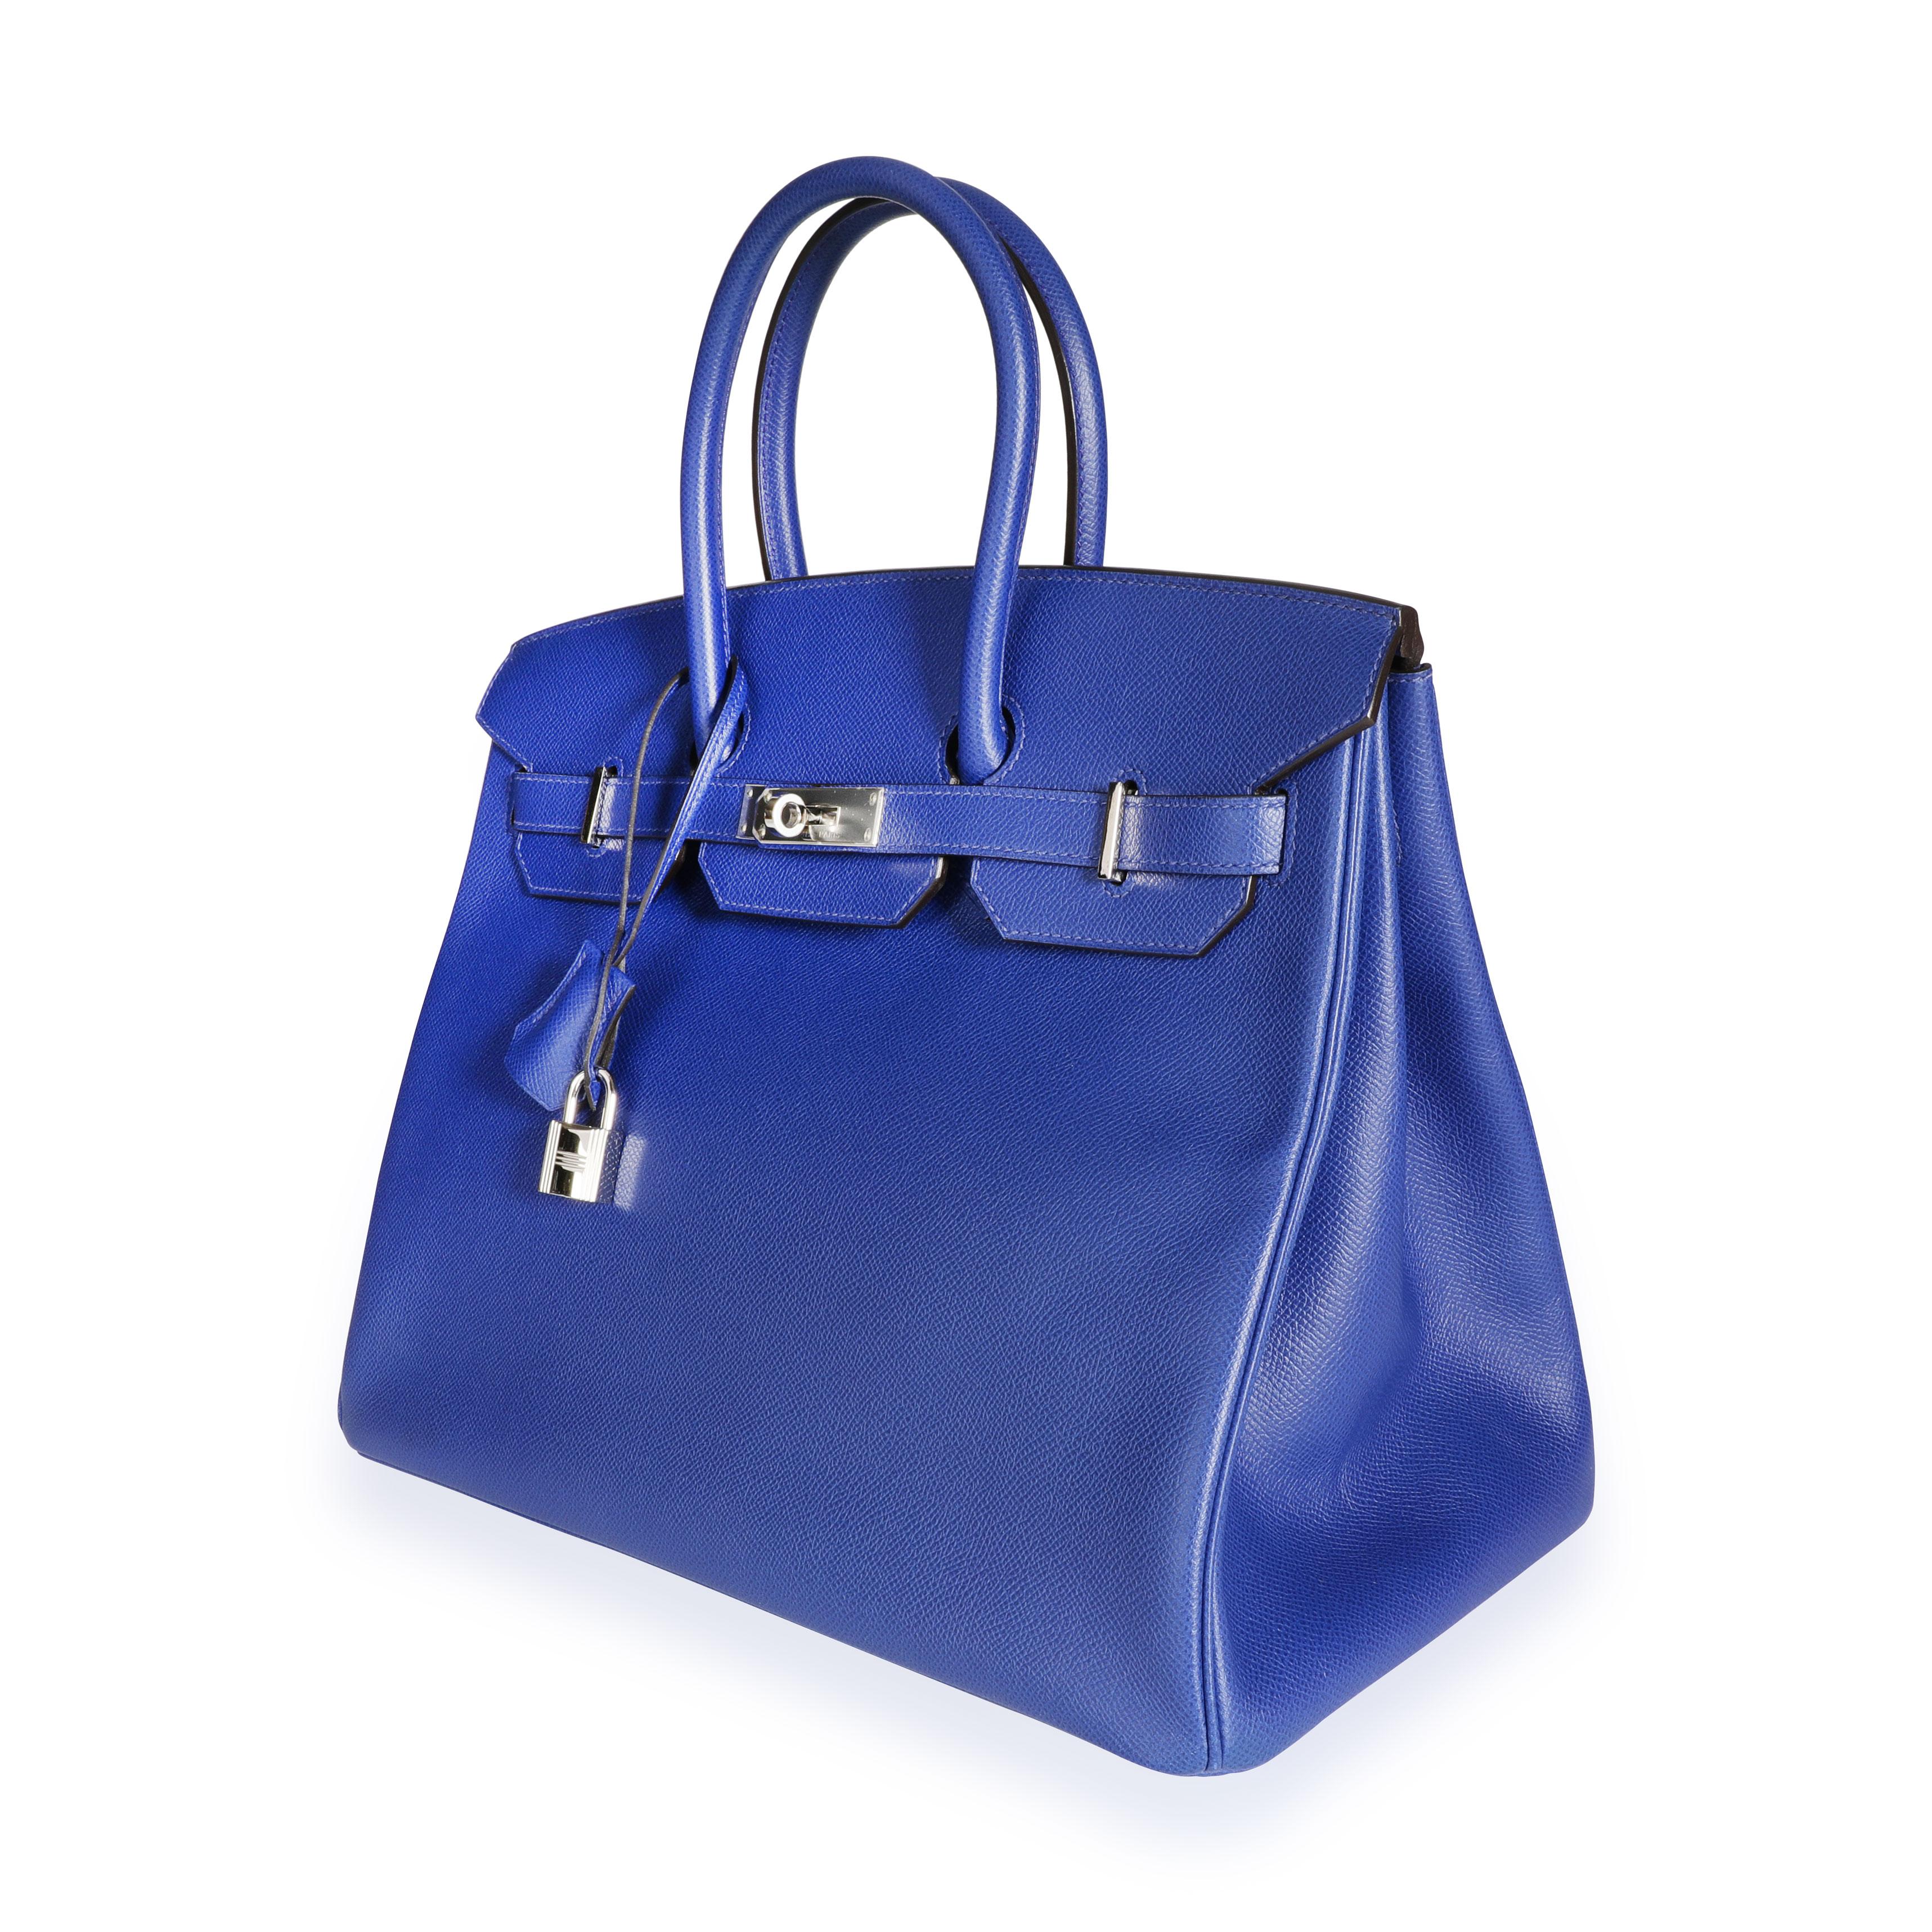 Hermès Bleu Électrique Epsom Birkin 35 PHW
SKU: 110053

Handbag Condition: Very Good
Condition Comments: Very Good Condition. Plastic on some hardware. Scuffing to corners. Light marks throughout exterior. Scratching to hardware.
Brand: